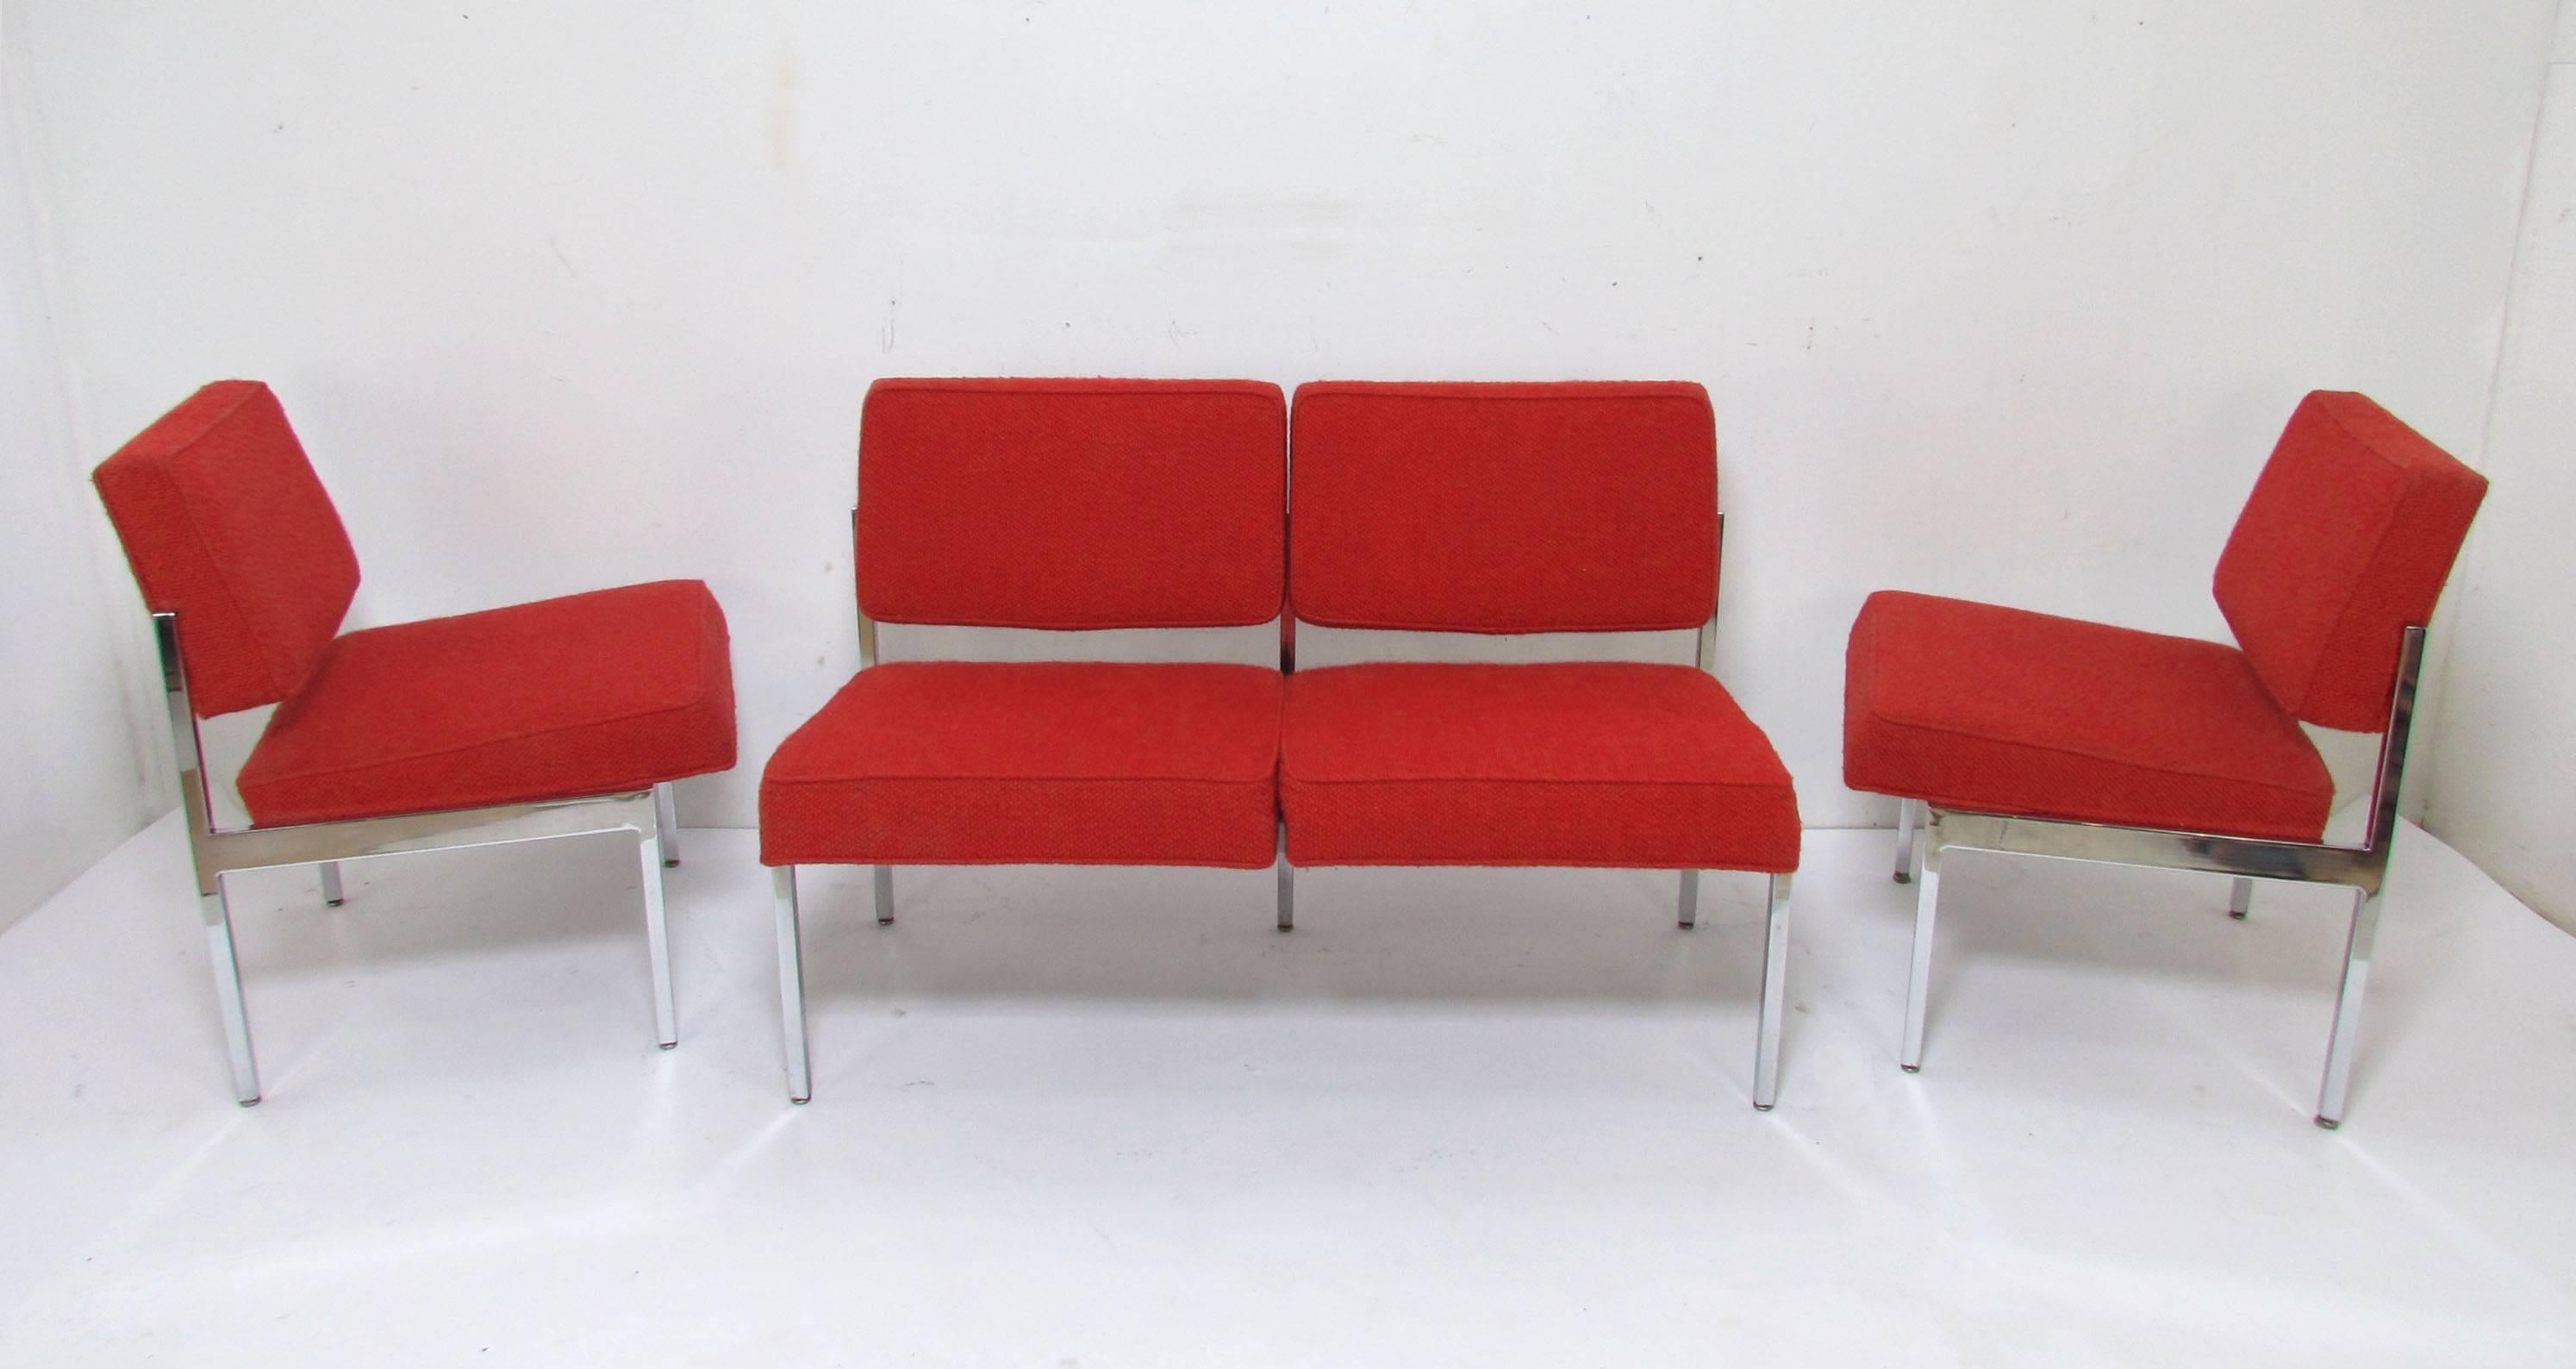 A pair of lounge chairs with matching two-seat sofa by Steelcase, circa 1960s, clearly influenced by the designs of Florence Knoll. Bright chromed steel frames and original nubby red upholstery.

Loveseat sofa measures 46.75